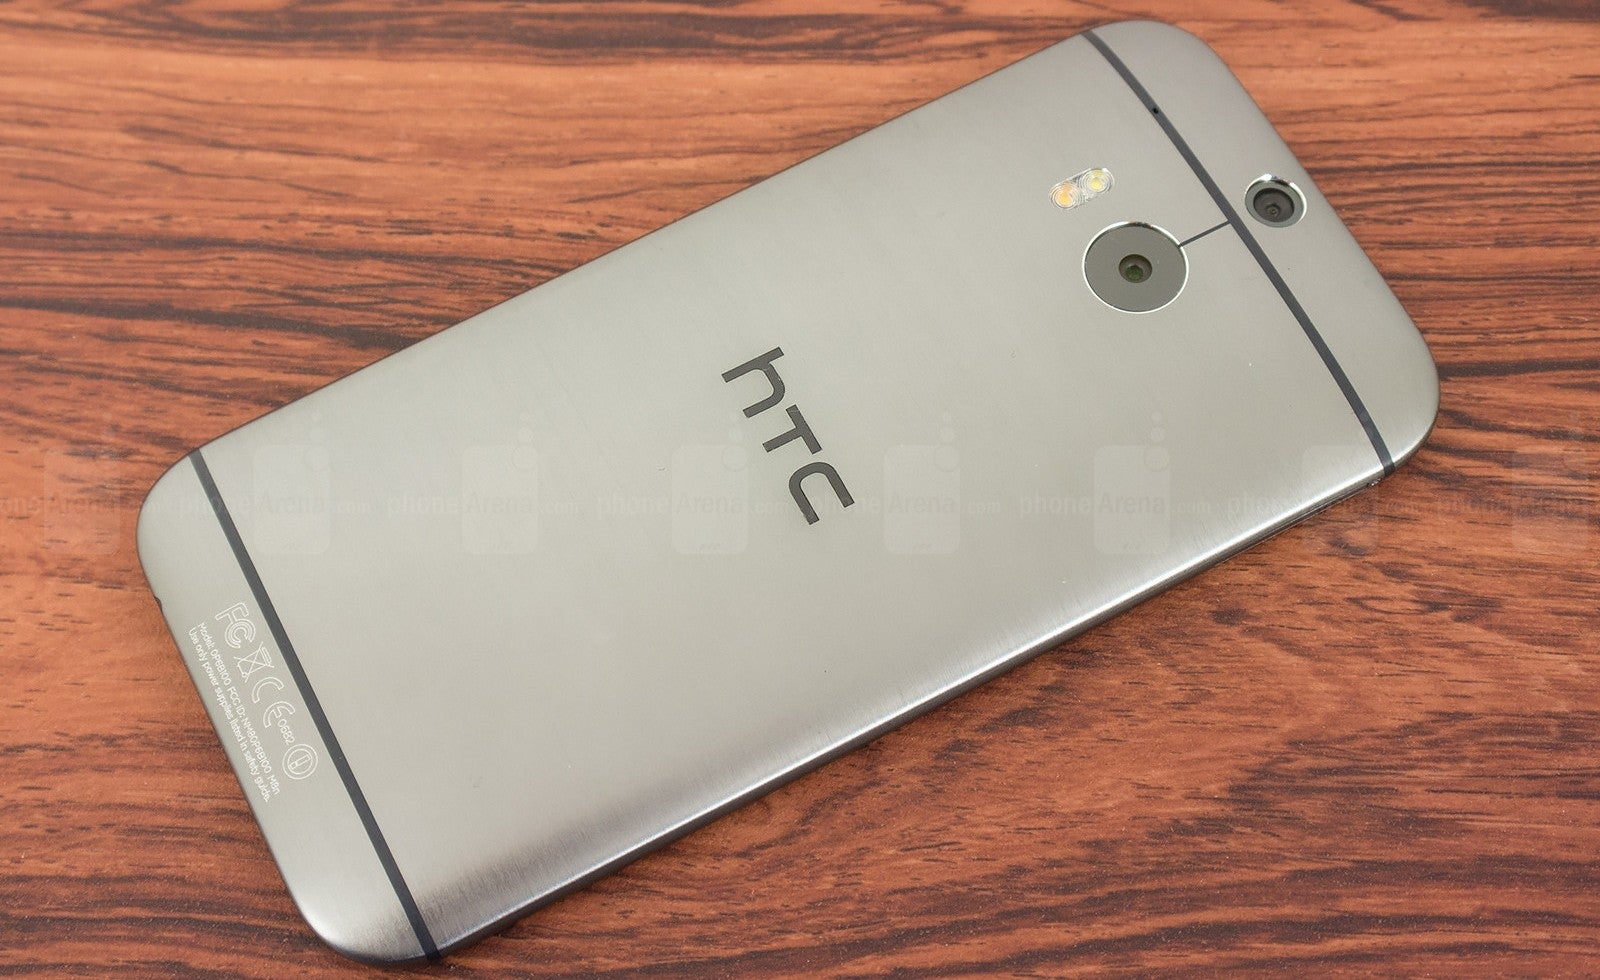 HTC aims to grab 8-10% of the smartphone market, CEO reconfirms tablets and wearables